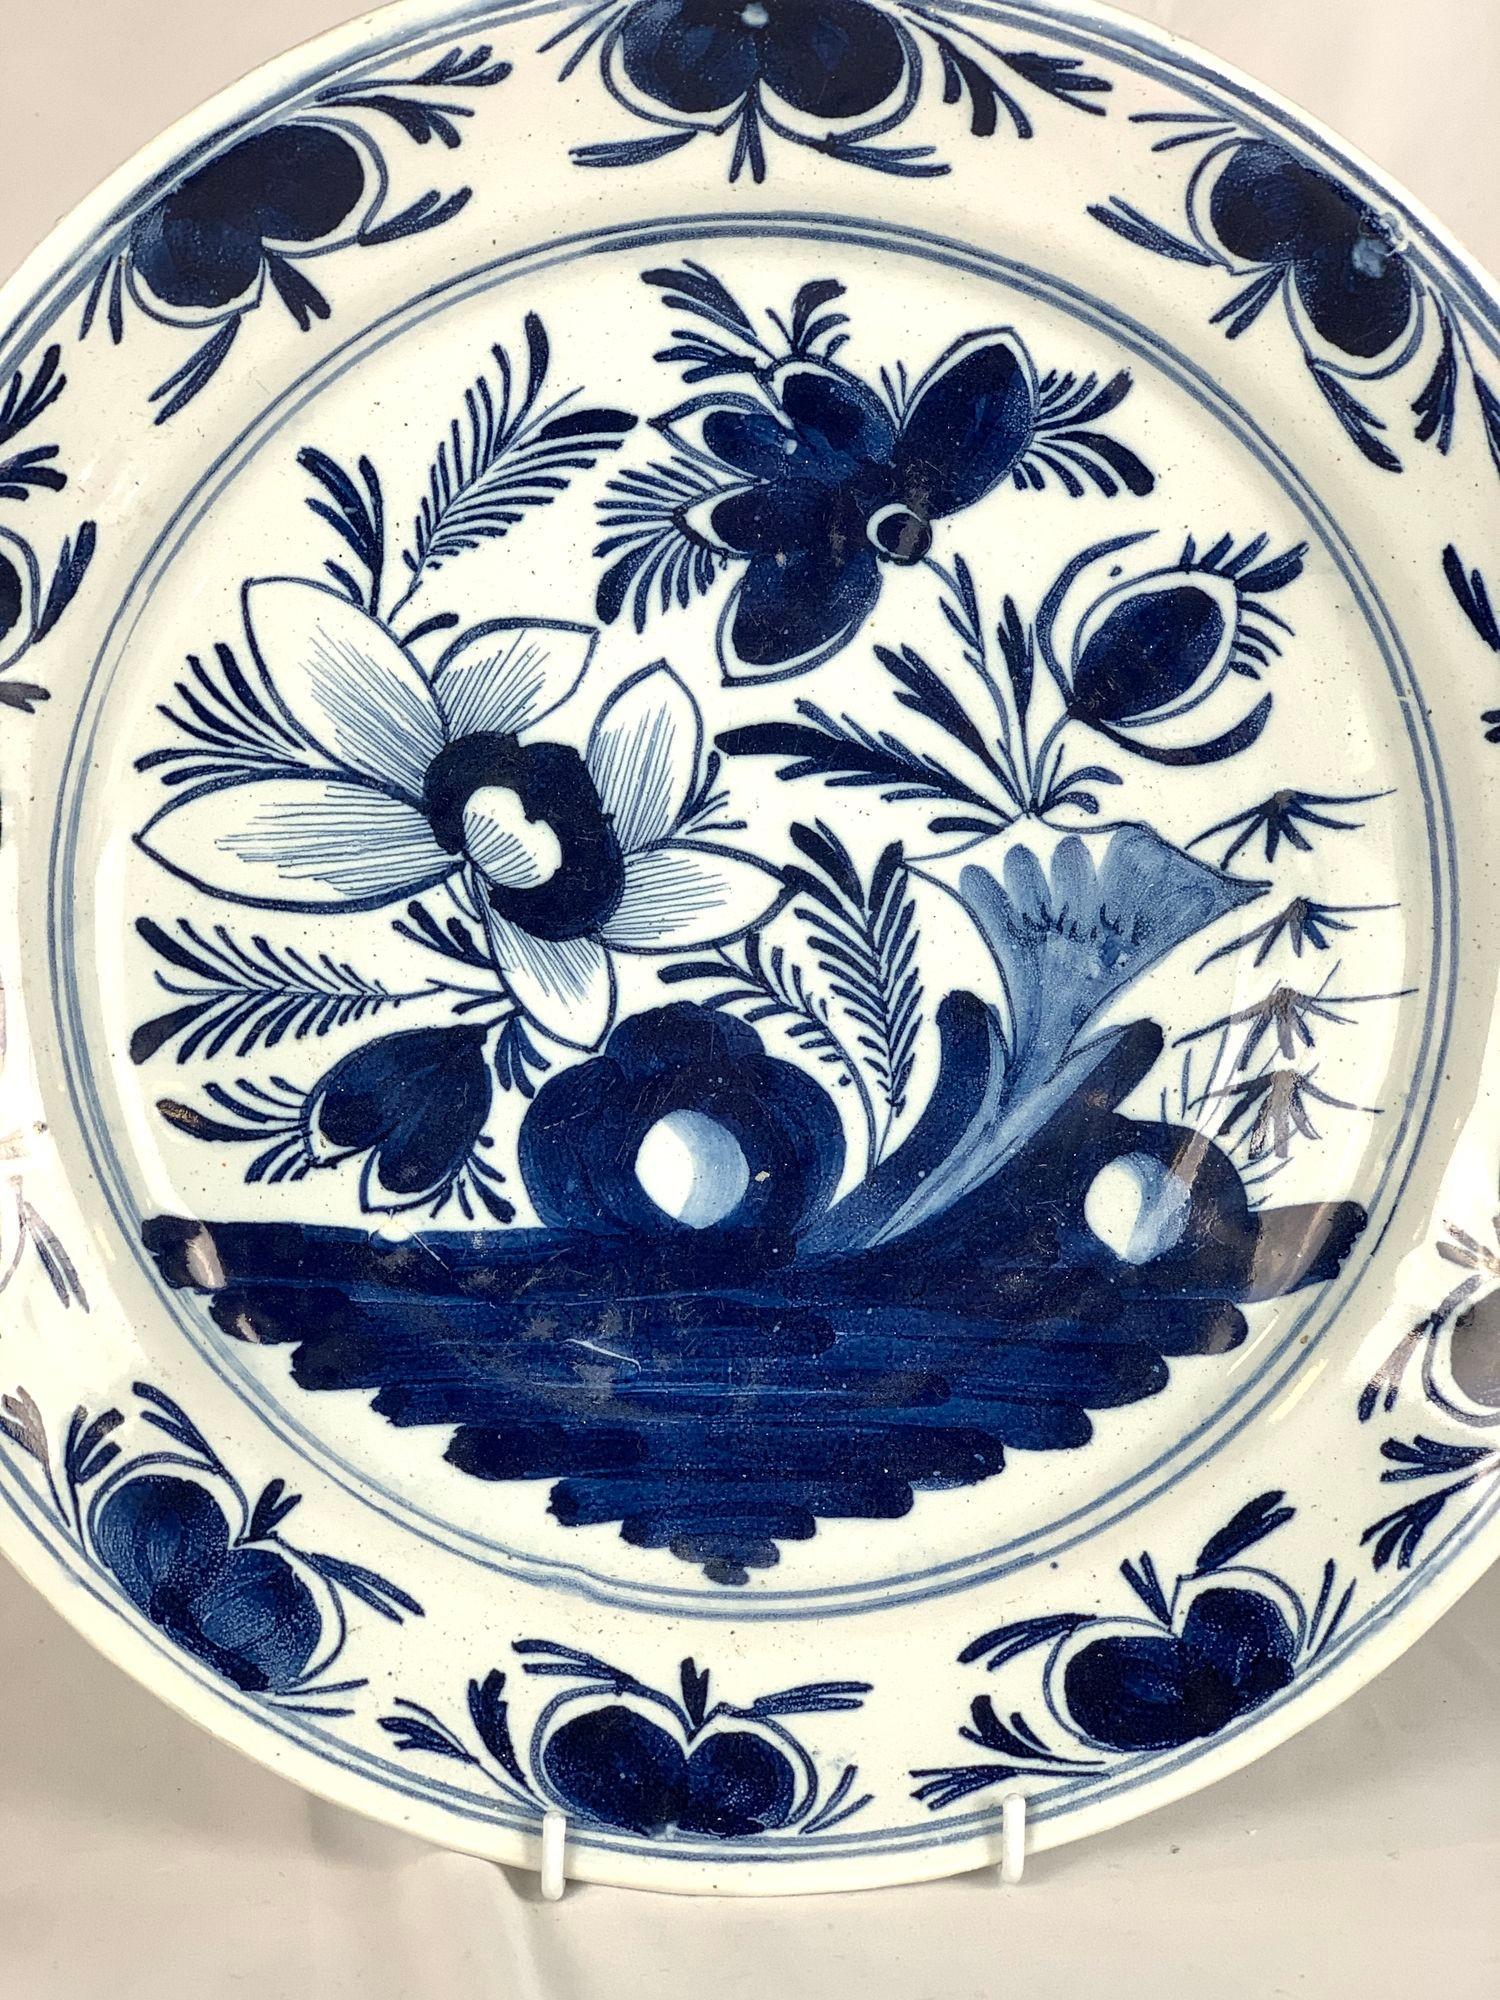 Hand painted in the Netherlands circa 1800, this blue and white Delft charger features a garden scene with flowering peonies.
We see blossoming flowers, buds, leaves, and rockwork.
The wide border shows a lovely repeating motif of buds and